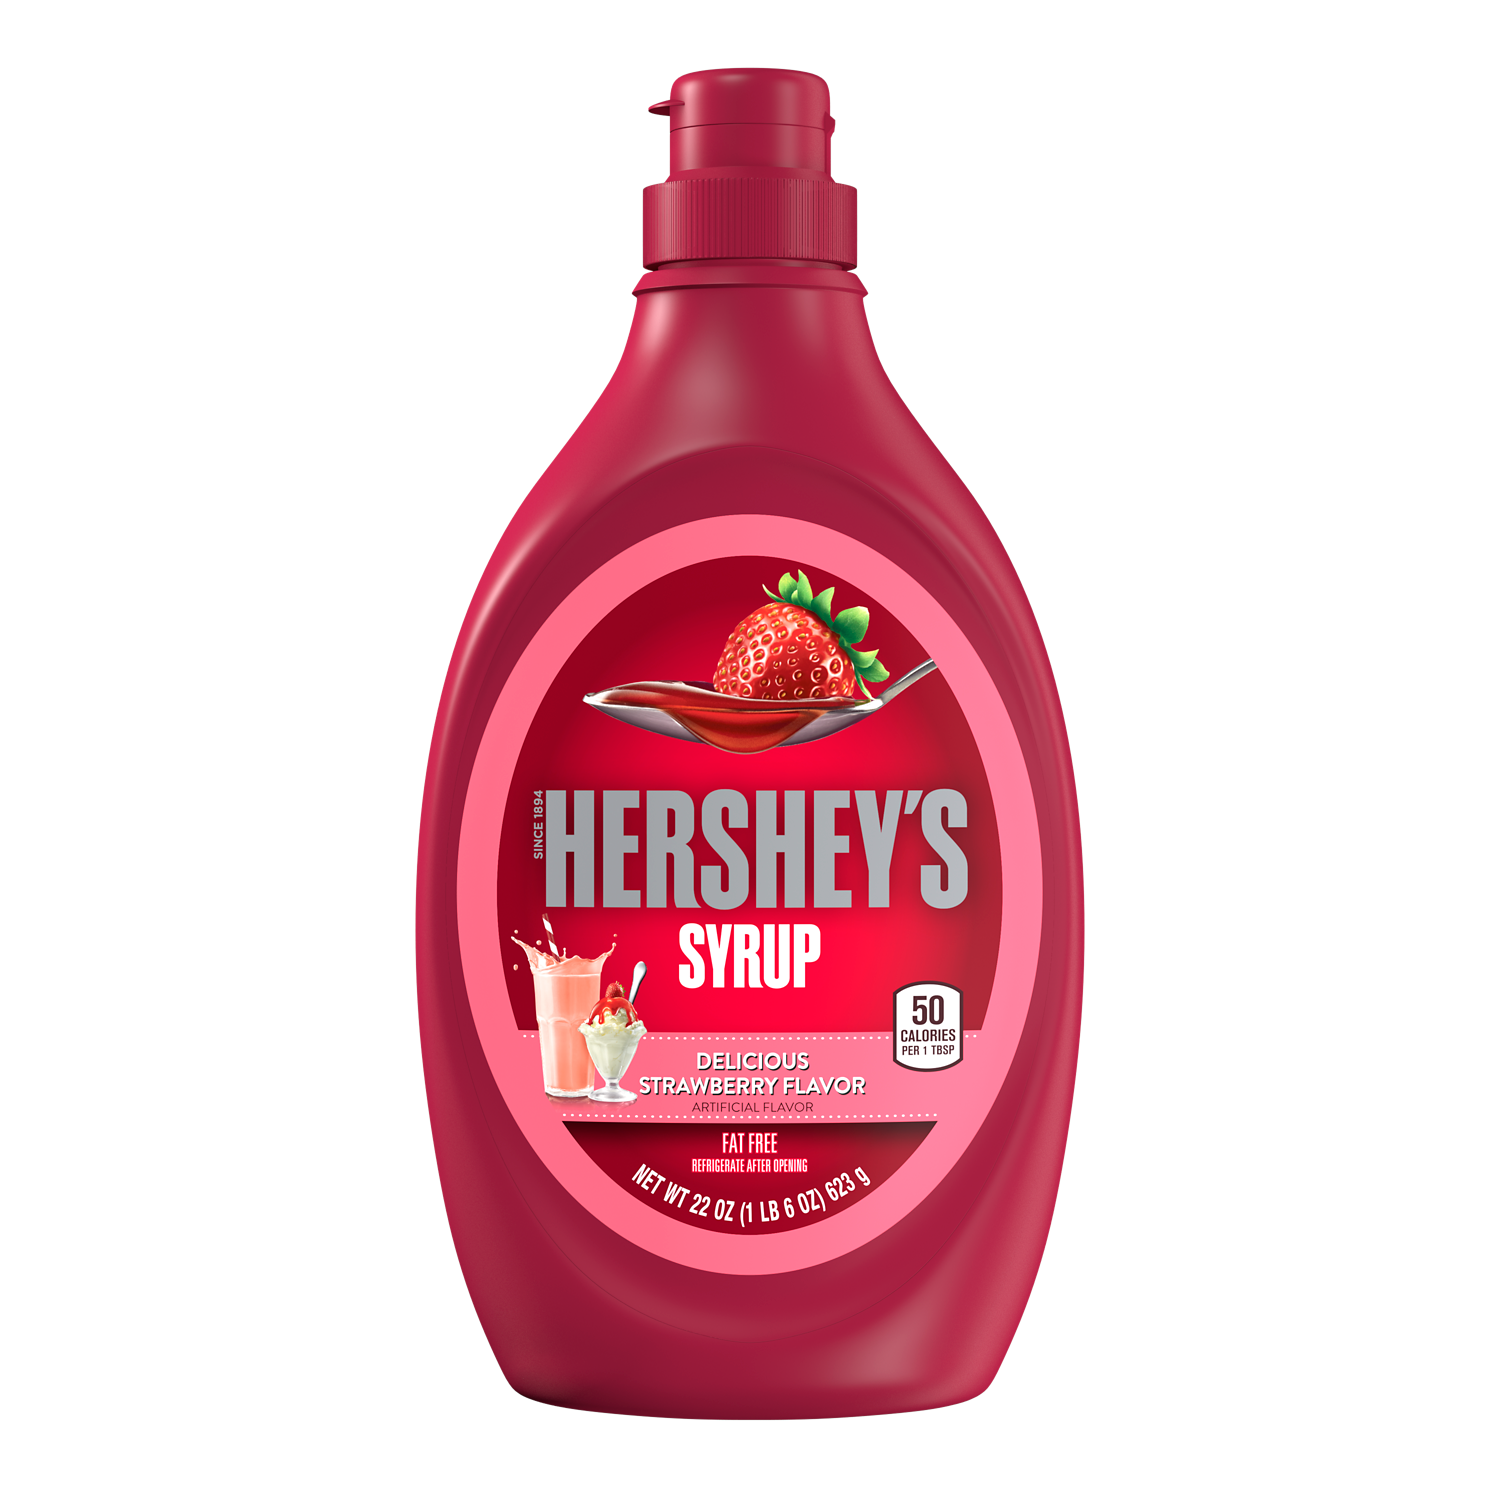 HERSHEY'S Strawberry Flavored Syrup, 22 oz bottle - Front of Package